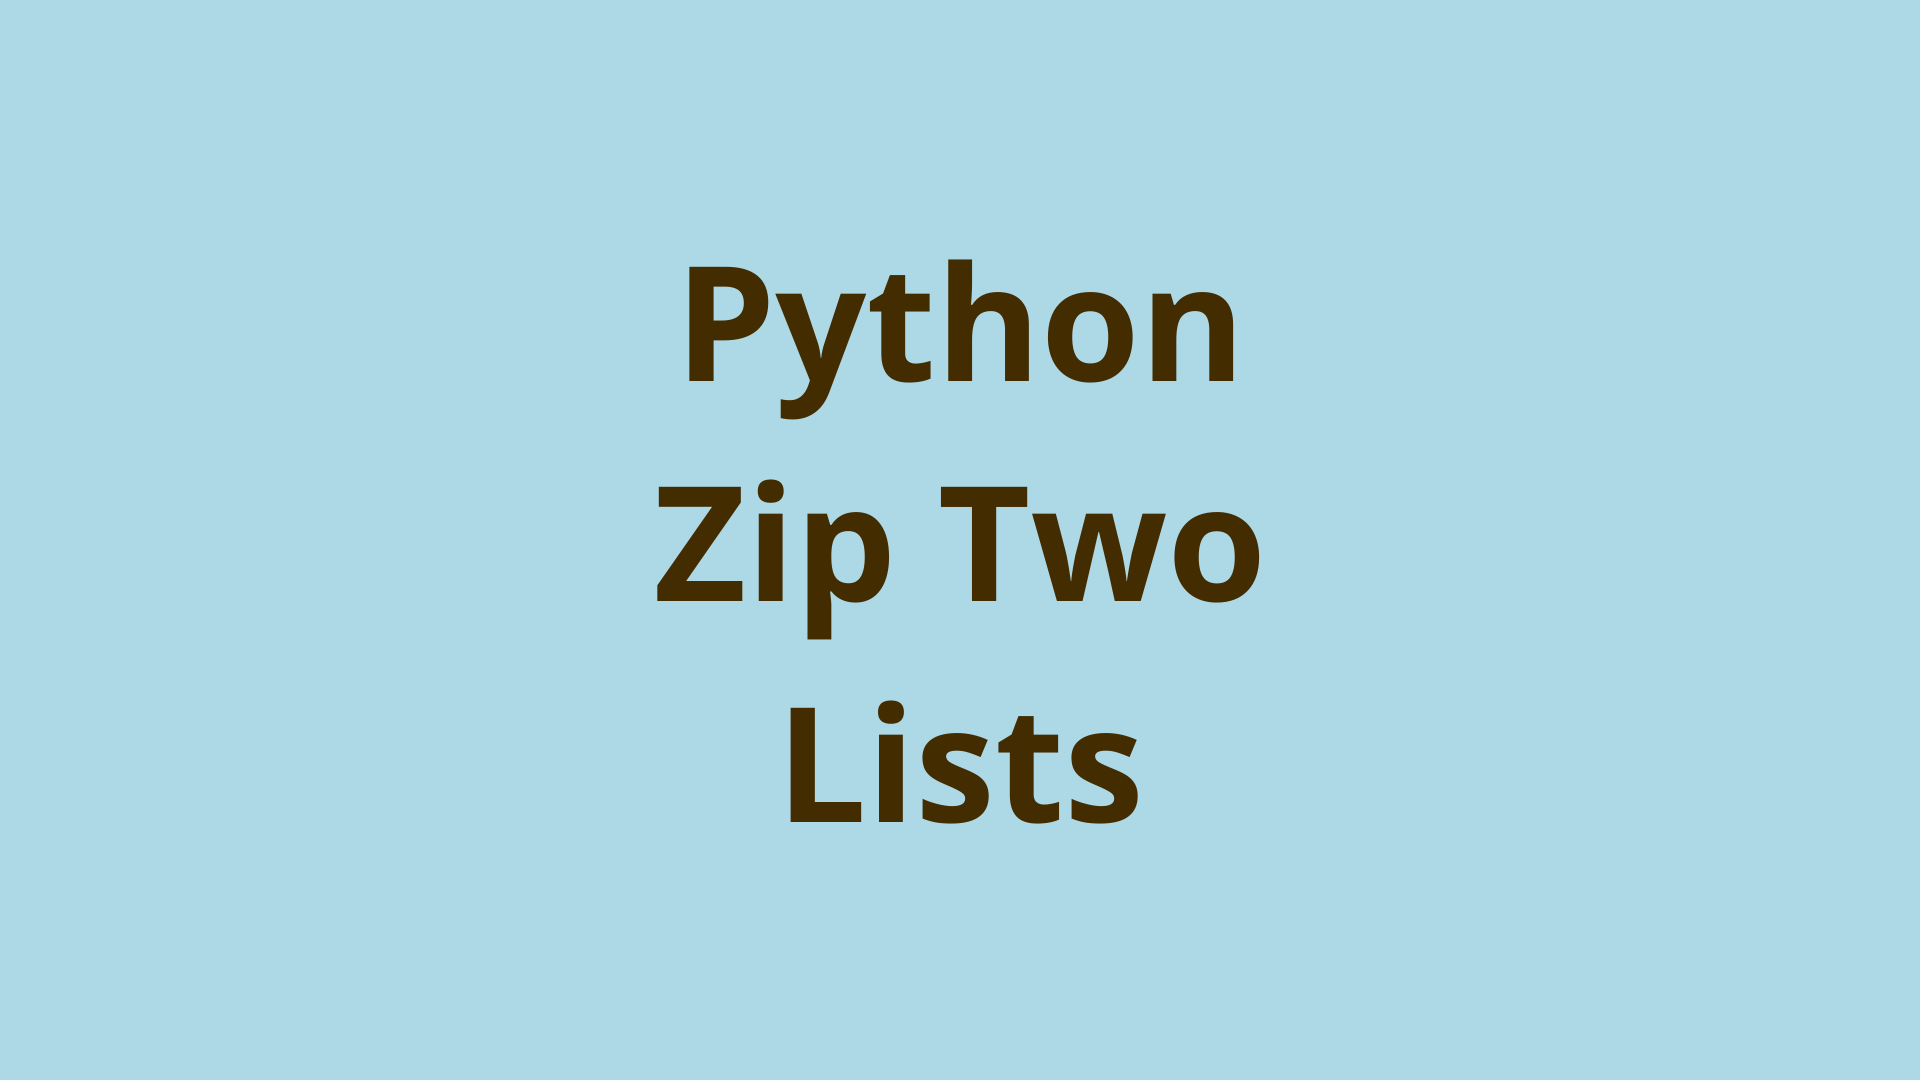 Image of Python Zip Two Lists